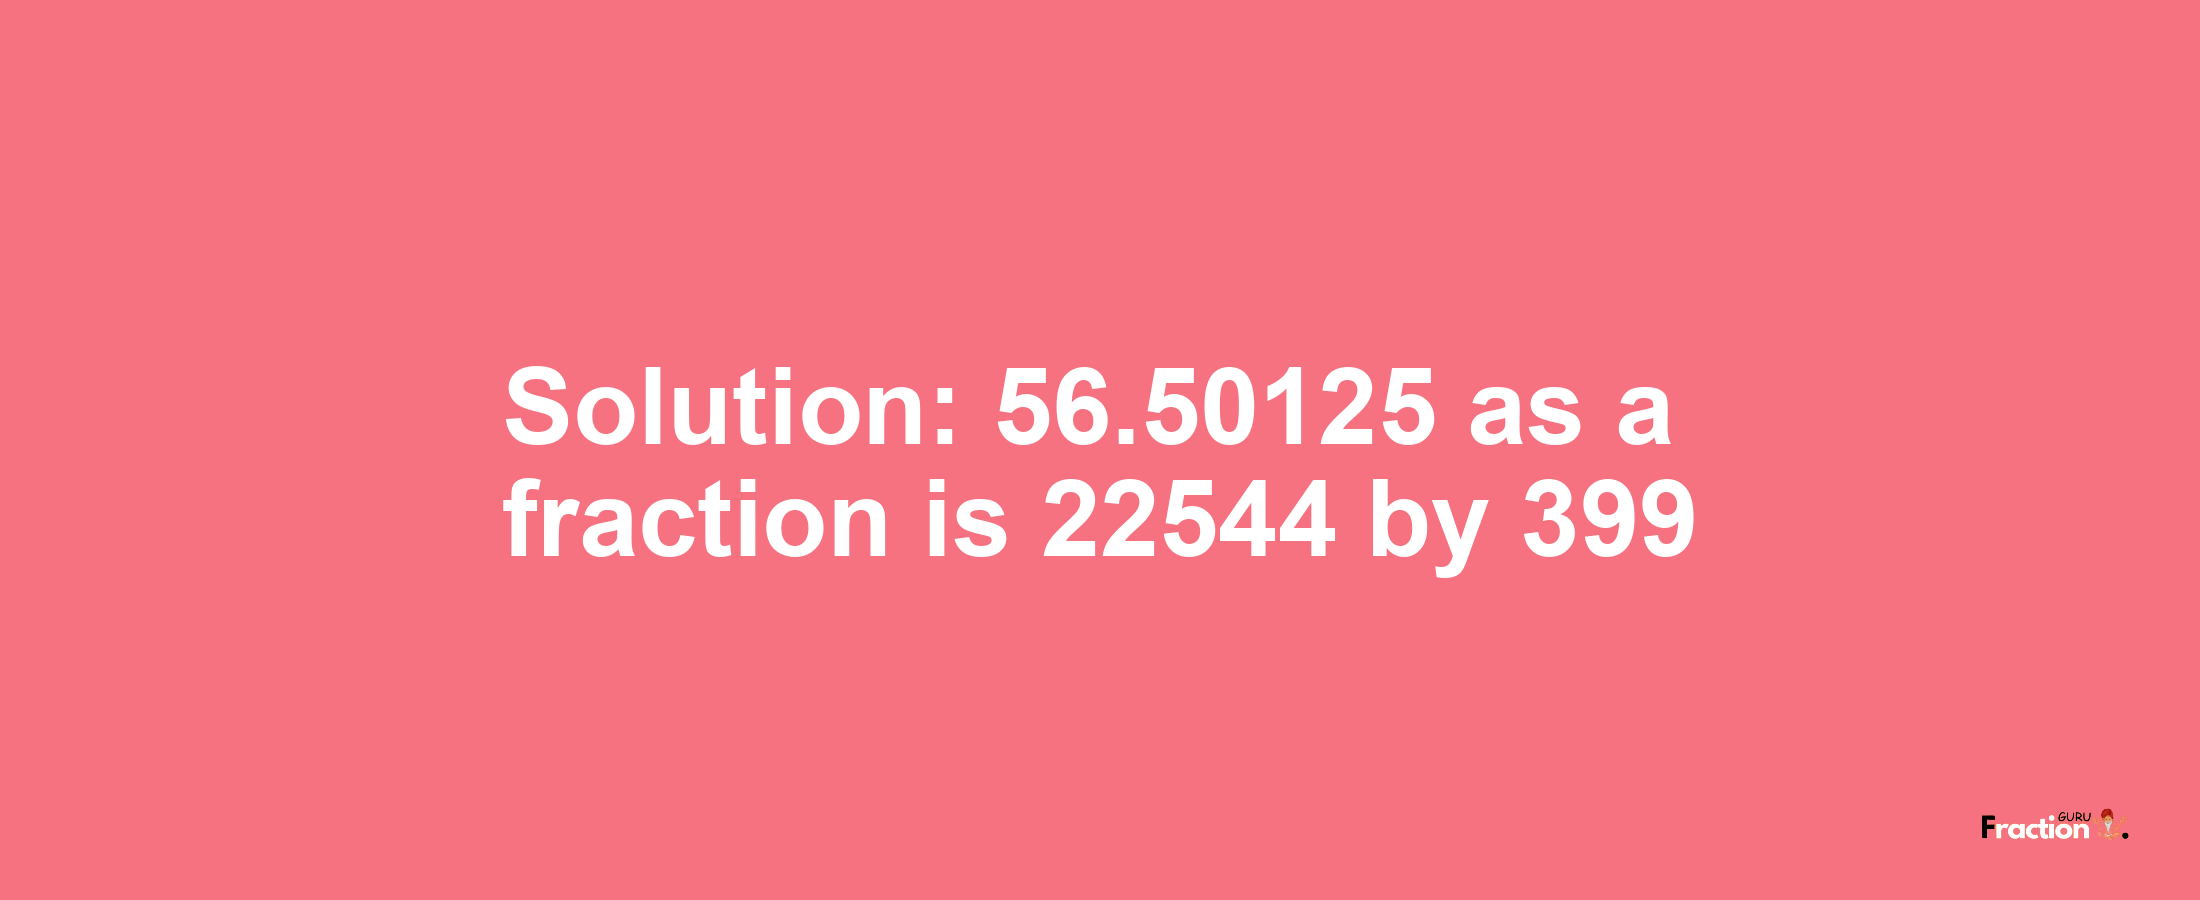 Solution:56.50125 as a fraction is 22544/399